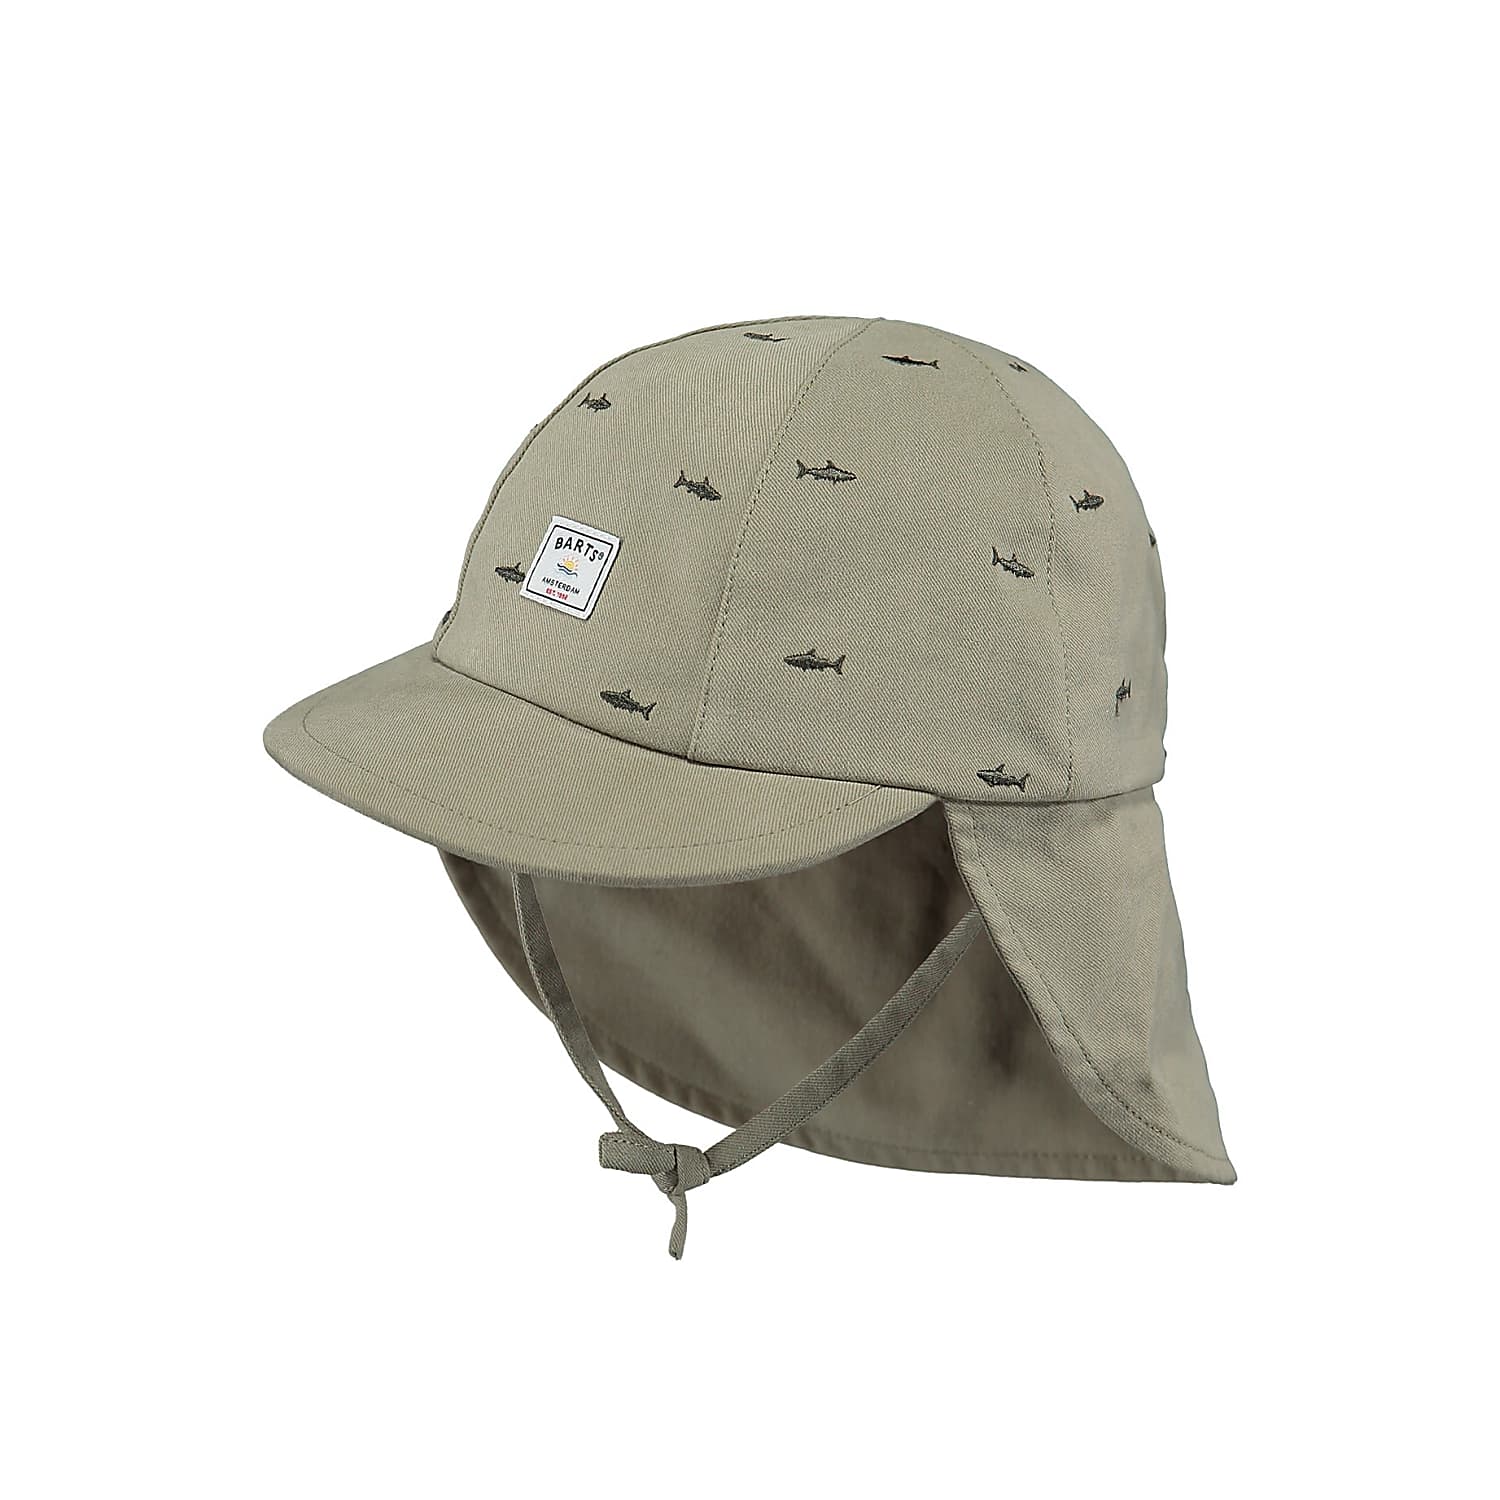 Barts KIDS IKKA CAP, Army - Fast and cheap shipping - www.exxpozed.com